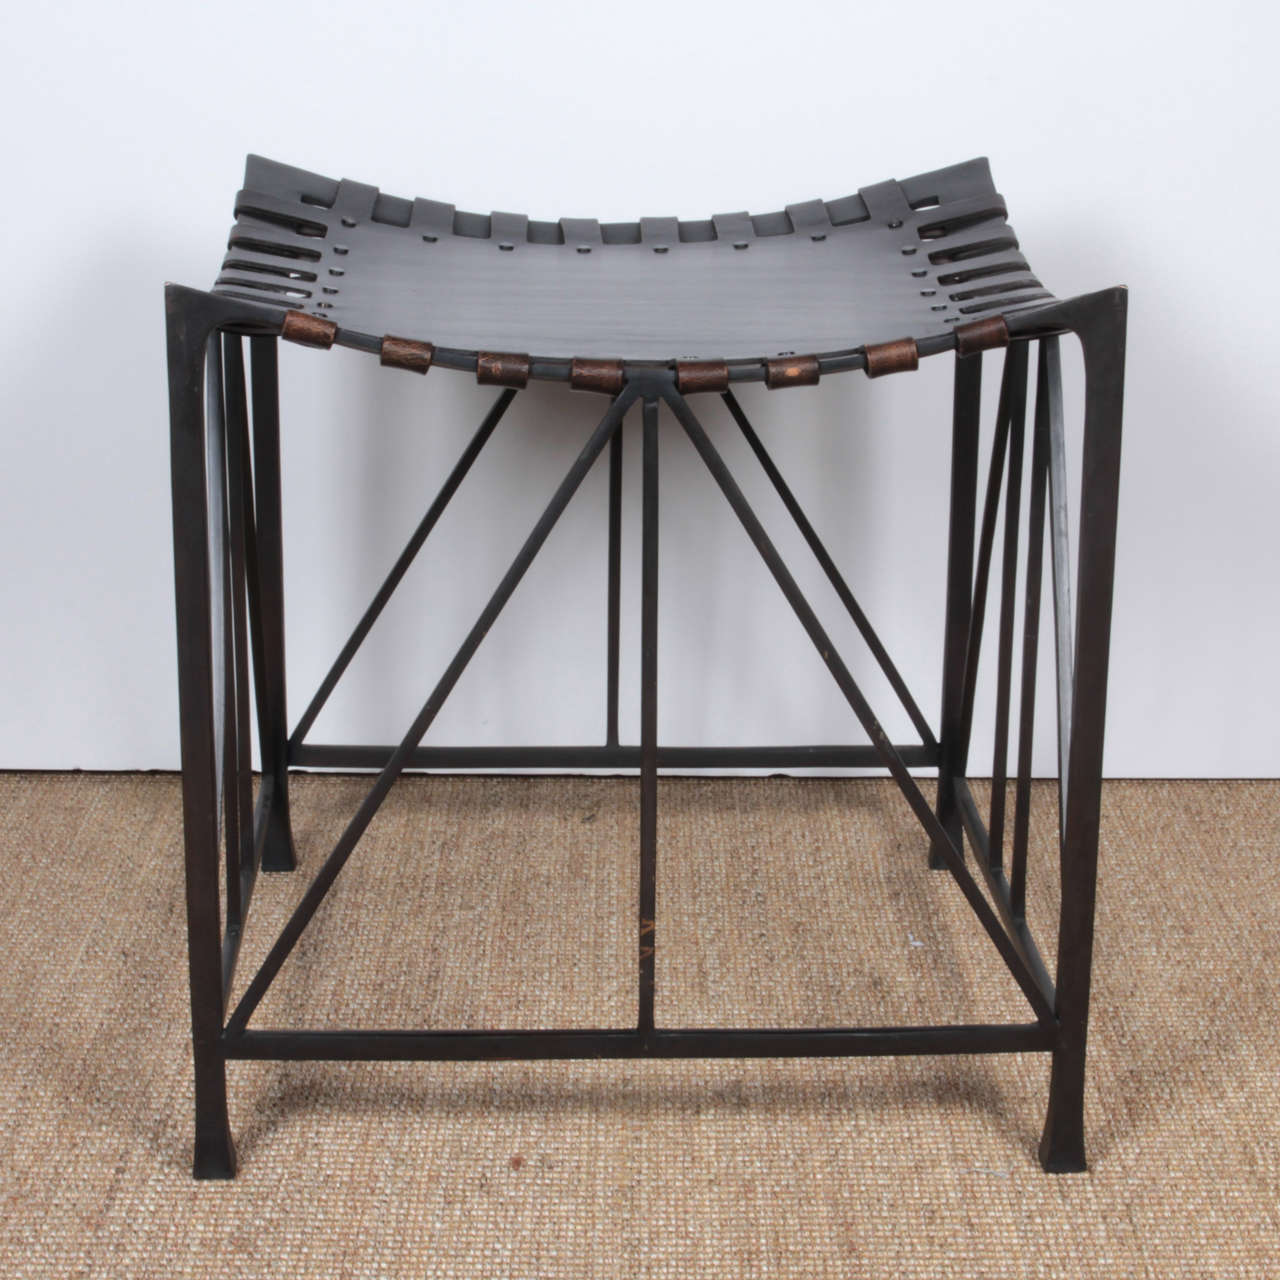 Contemporary bronze,
And leather stool.